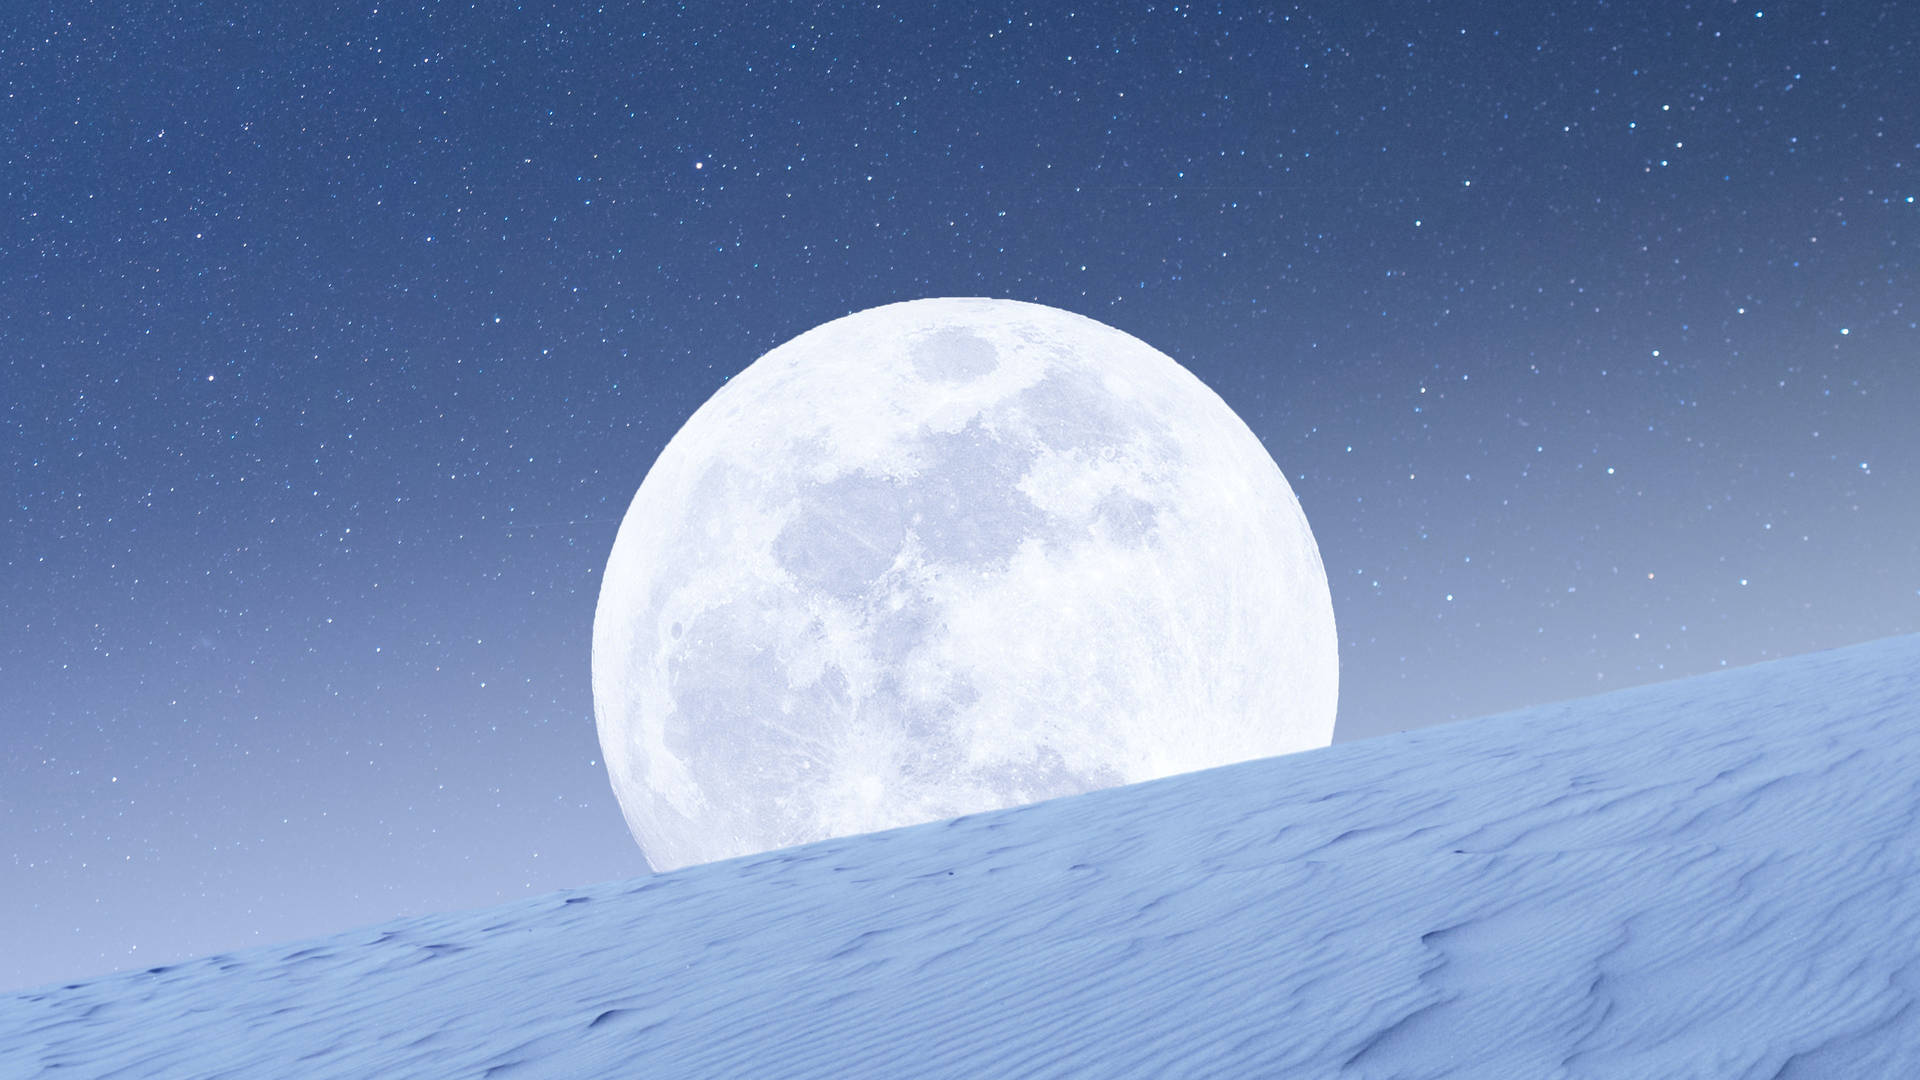 Aesthetic Moon Over The Snowy Hill